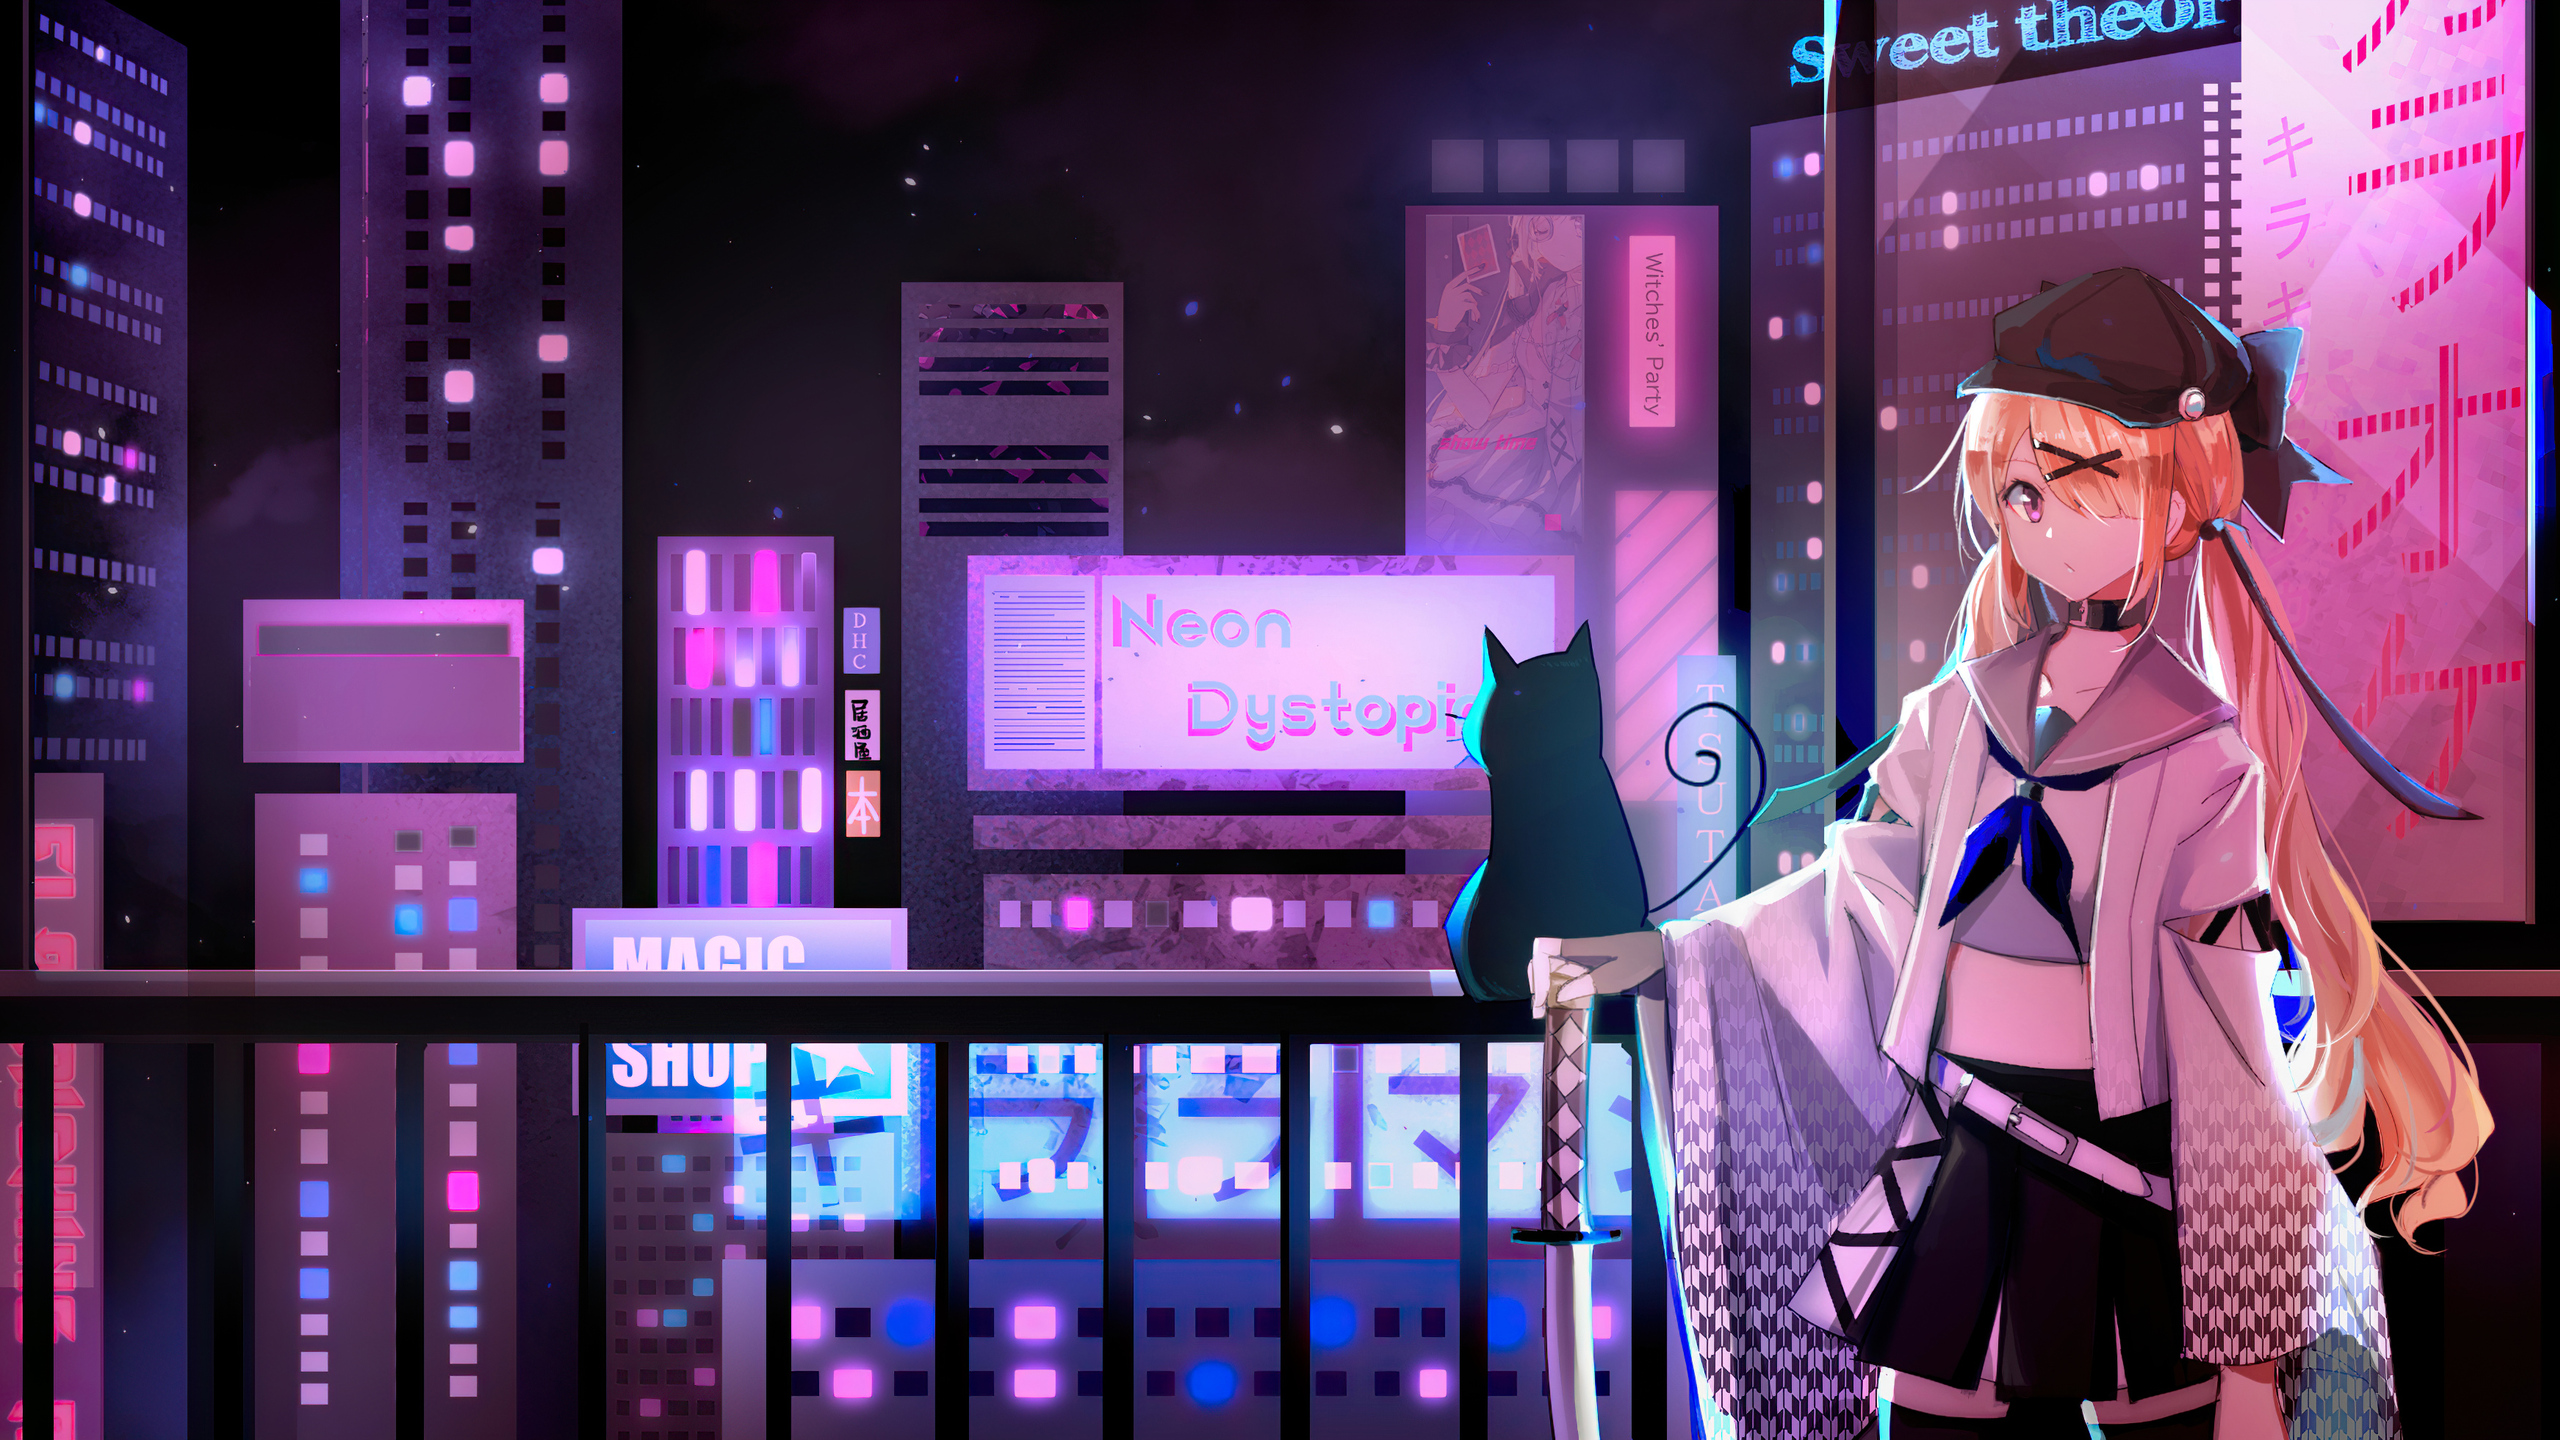 Anime girl with cat and neon city background - Magic